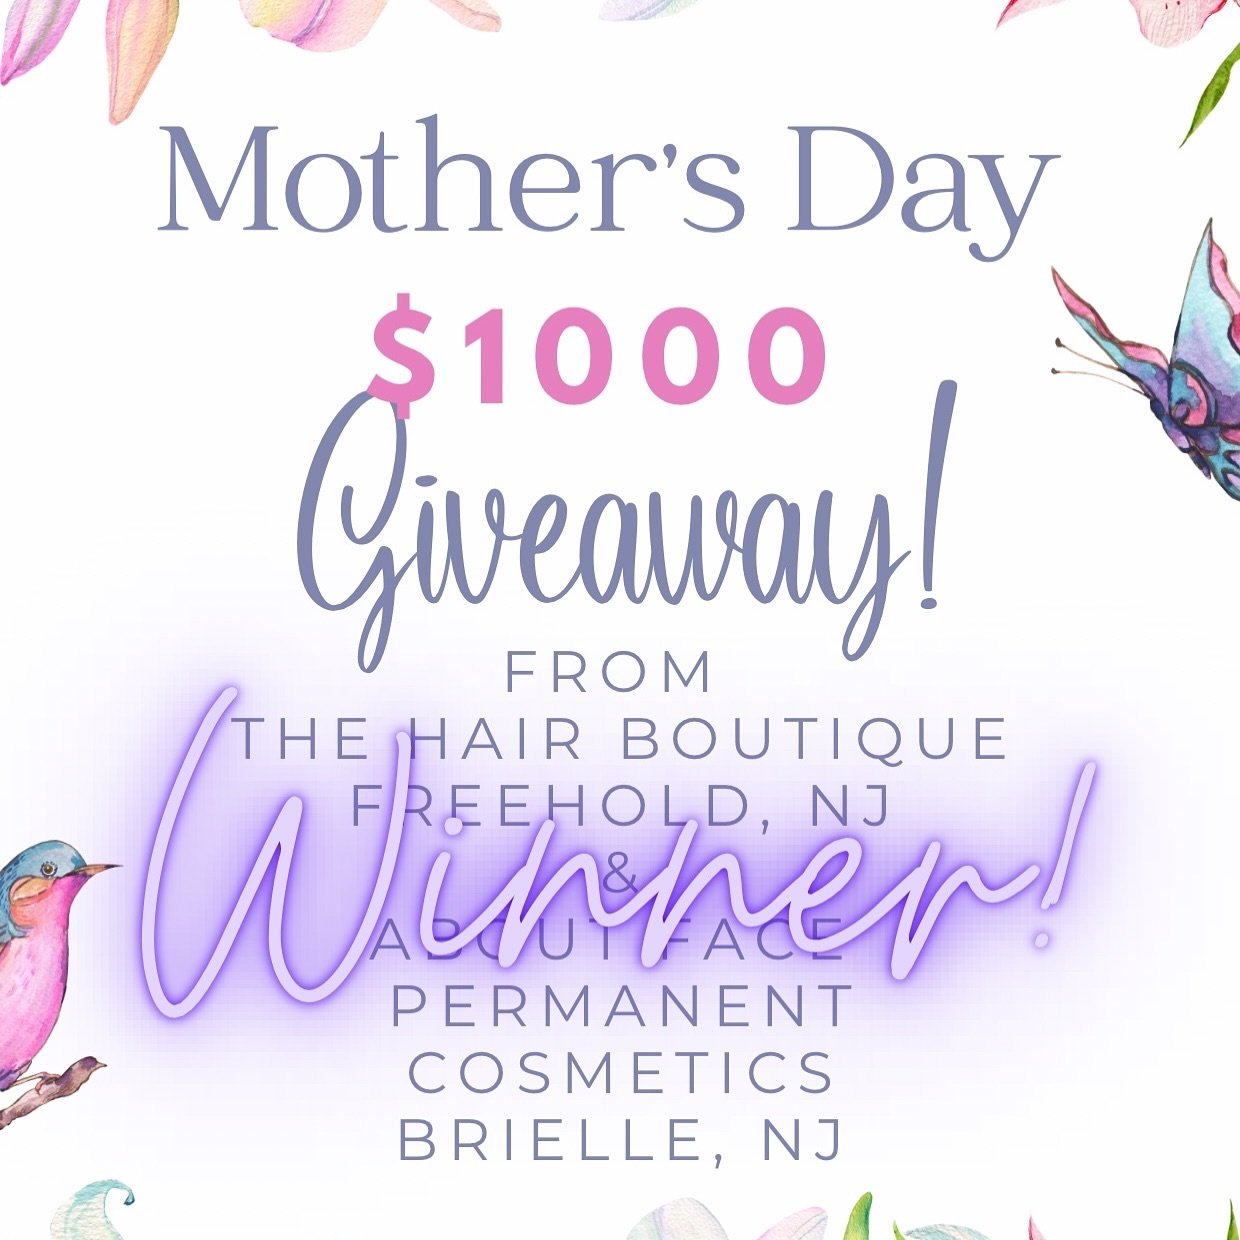 #giveawaywinner of the $1000 giveaway is Nicole Egan via @shannoneganz 🤩🤩🌸🌸😍😍🔥🔥🤩🤩🍀🍀✨✨!!!!!!!! Congratulations and please dm me for more info!! @thehairboutique.nj